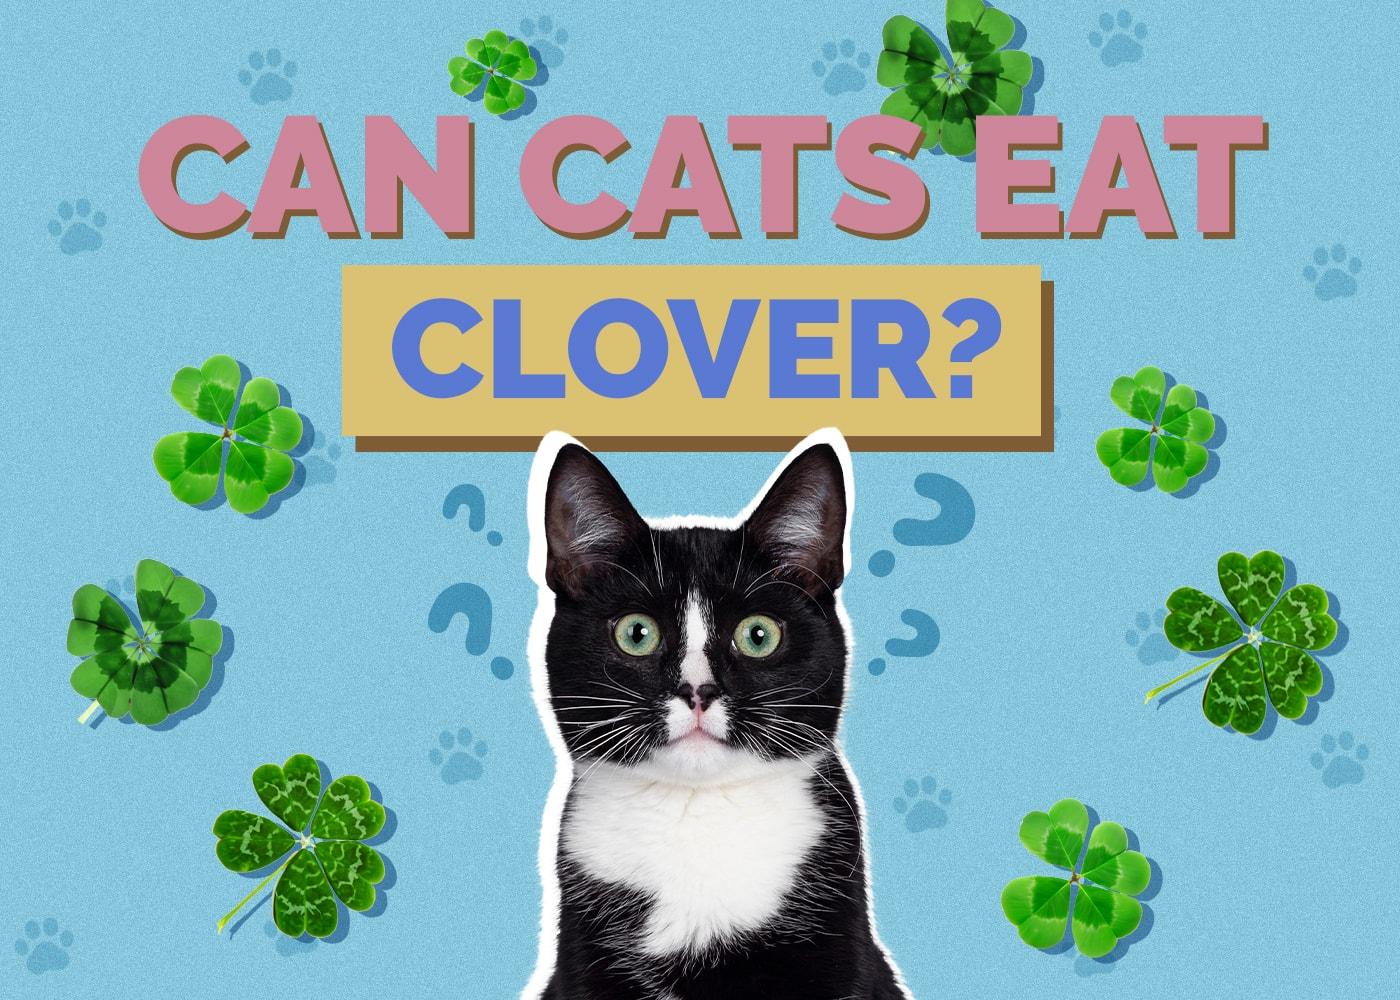 Can Cats Eat clover